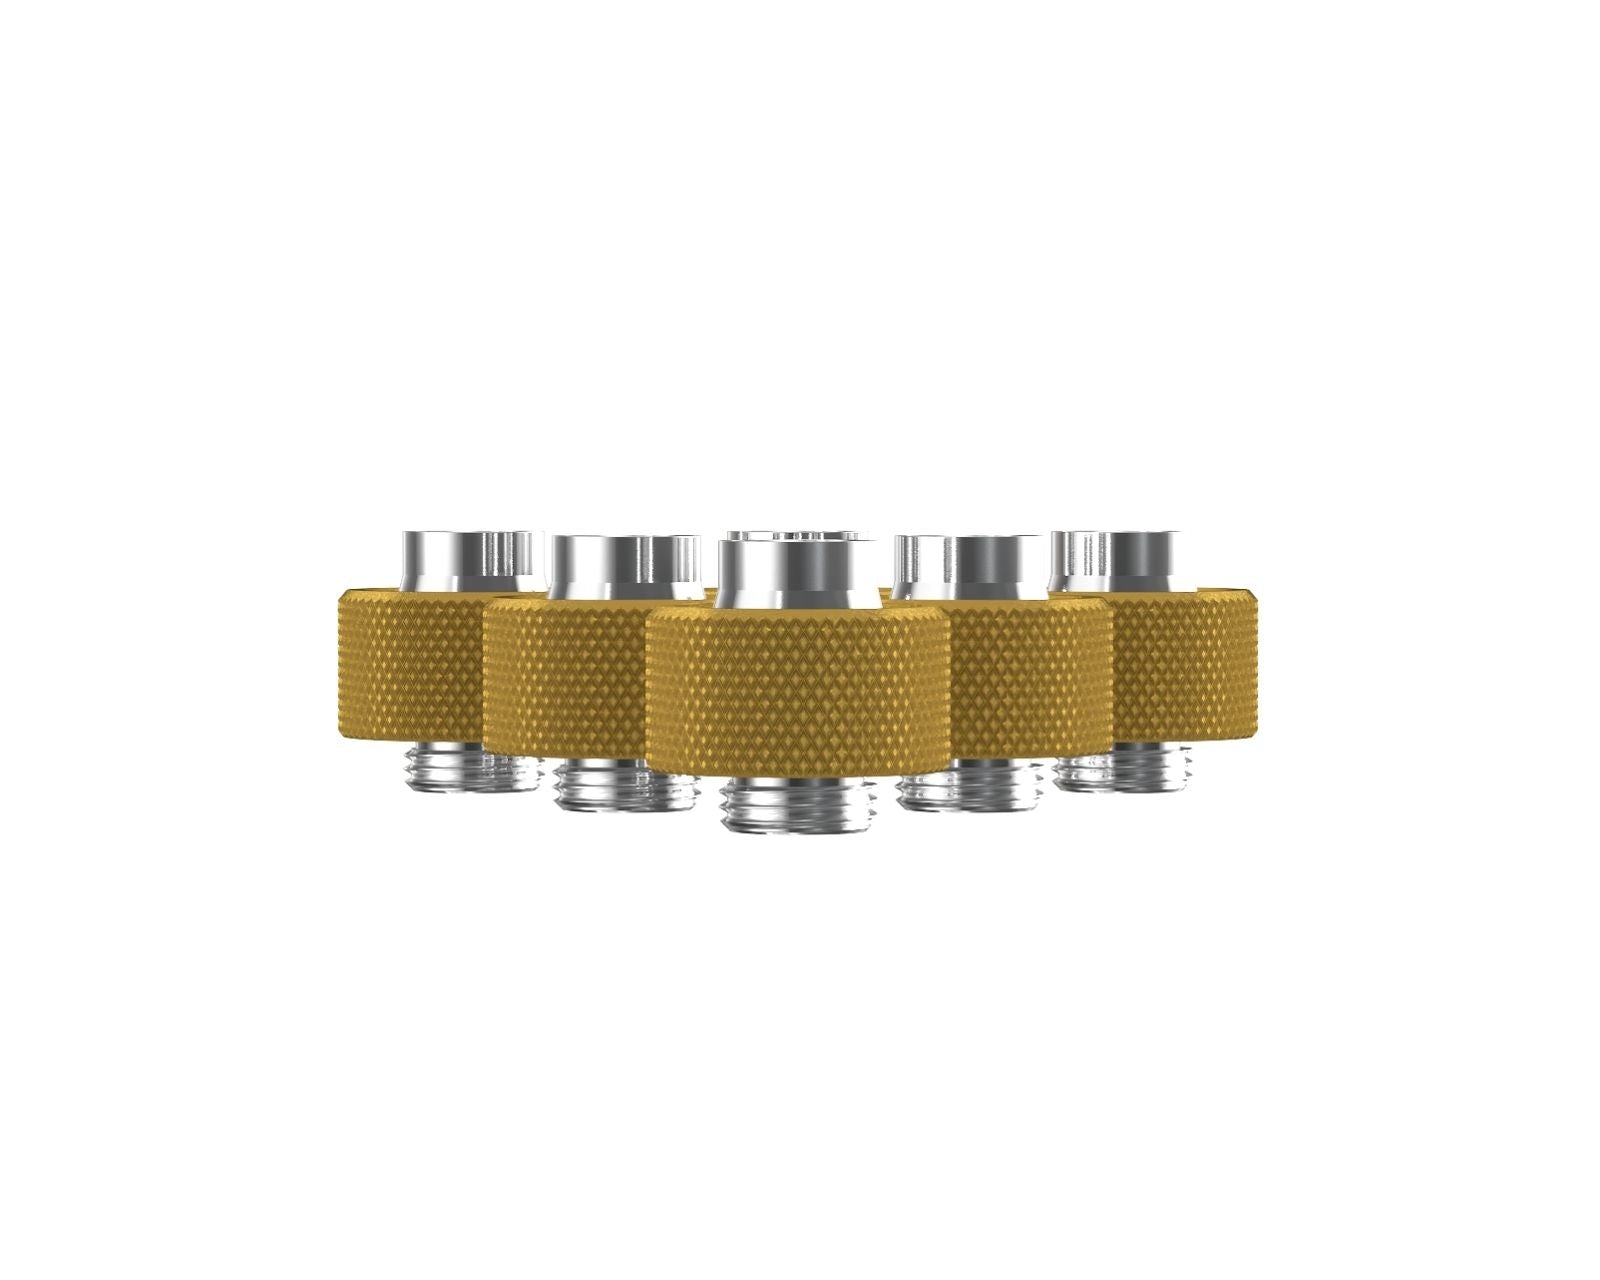 PrimoChill SecureFit SX - Premium Compression Fittings 6 Pack - For 1/2in ID x 3/4in OD Flexible Tubing (F-SFSX34-6) - Available in 20+ Colors, Custom Watercooling Loop Ready - Gold